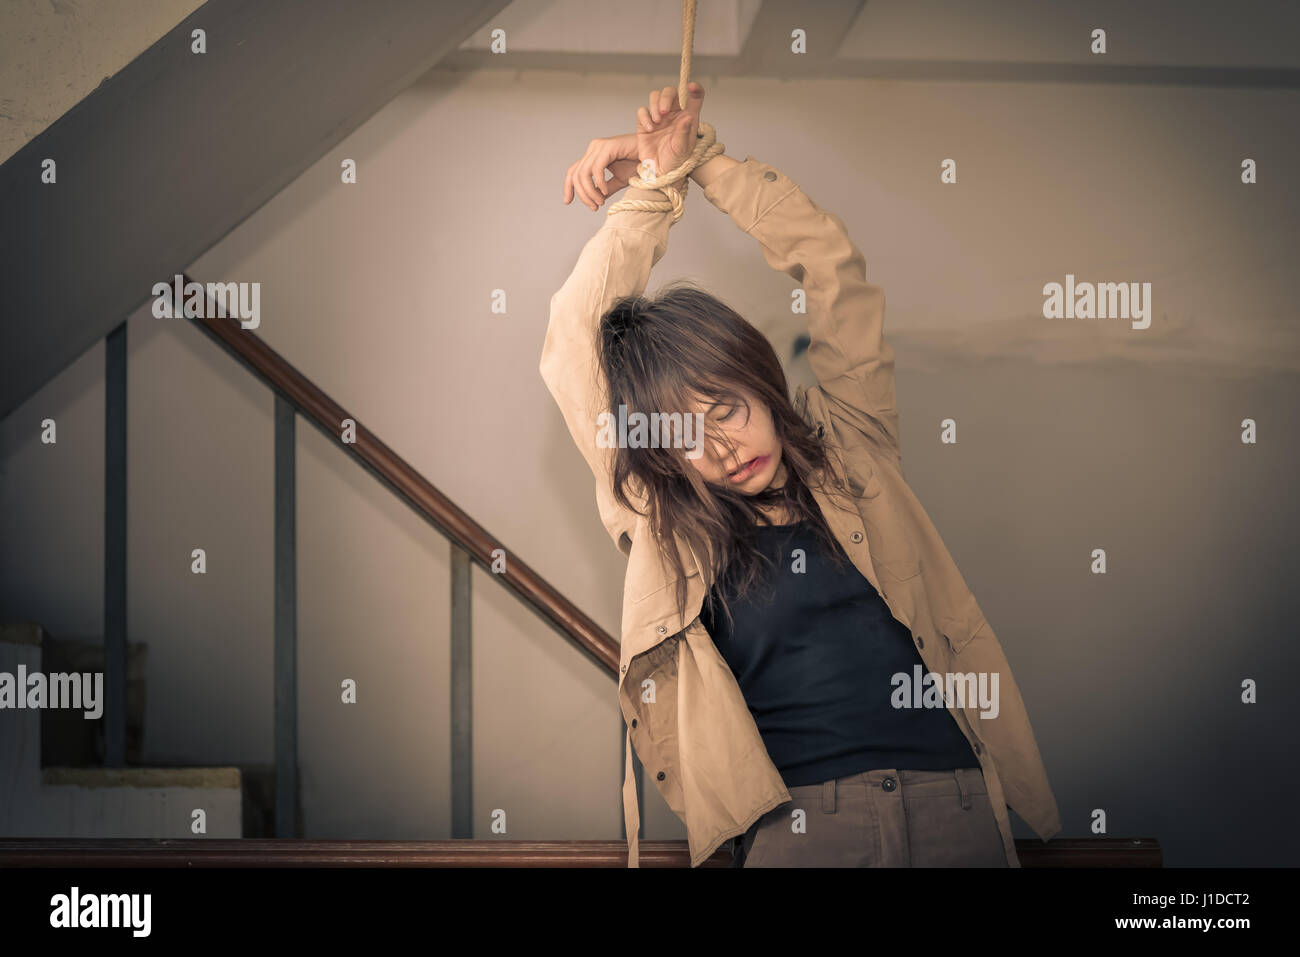 Female Hostage are tied up with ropes hanging on abandoned building ladders, Vintage tone Stock Photo